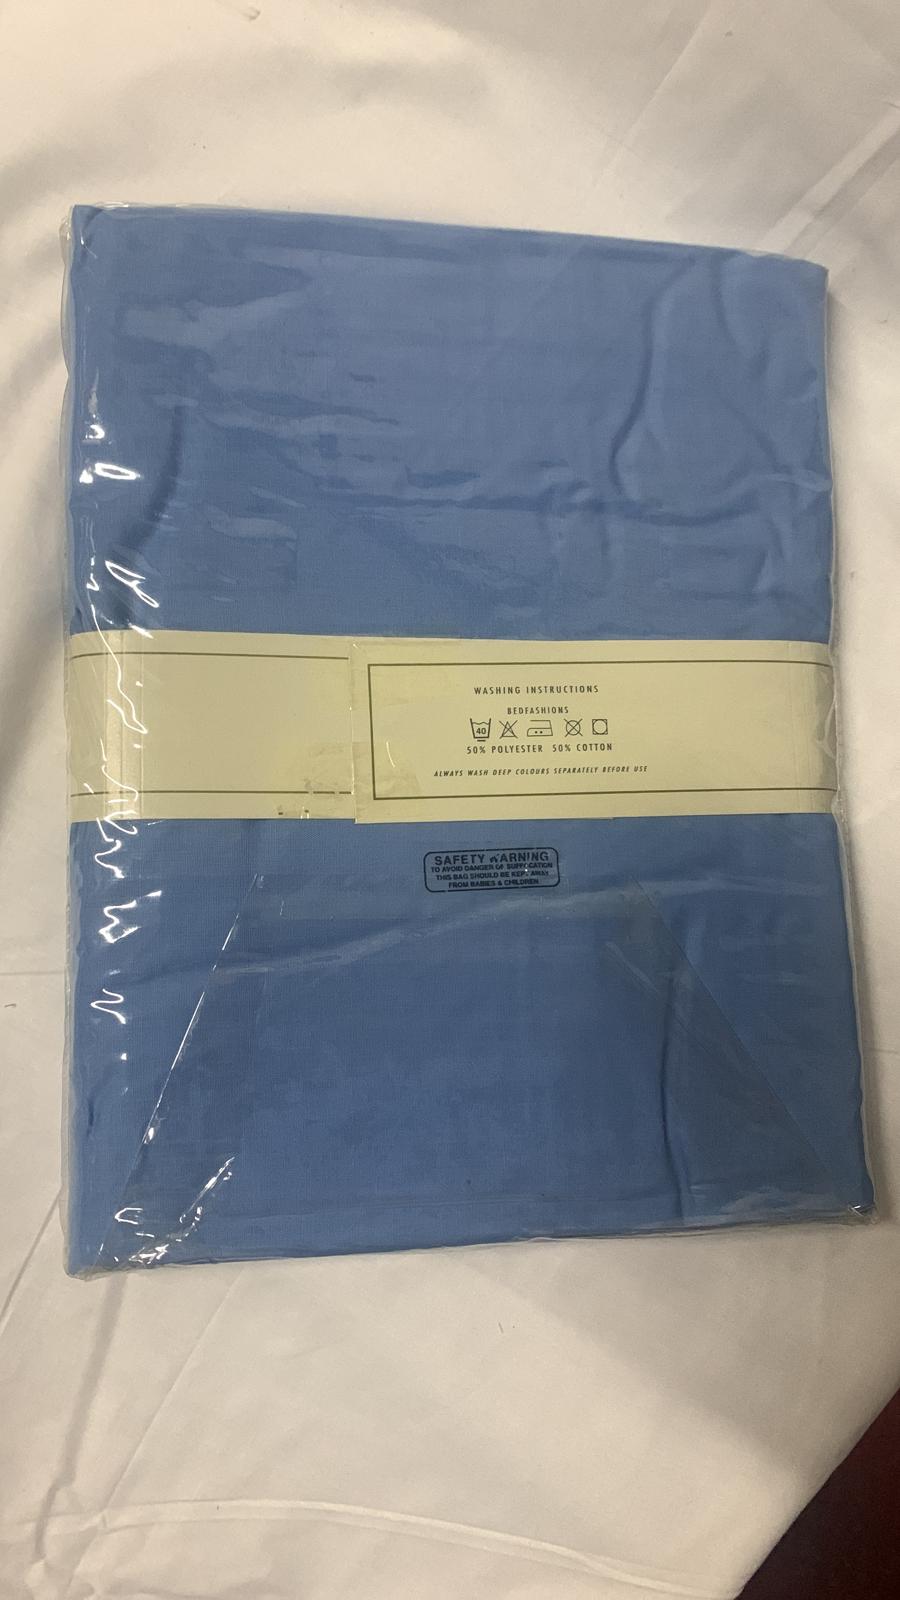 100% Poly Cotton Extra Deep 8" Fitted Sheets double Bed Sheets Clearance sheets Sale ⭐⭐⭐⭐⭐